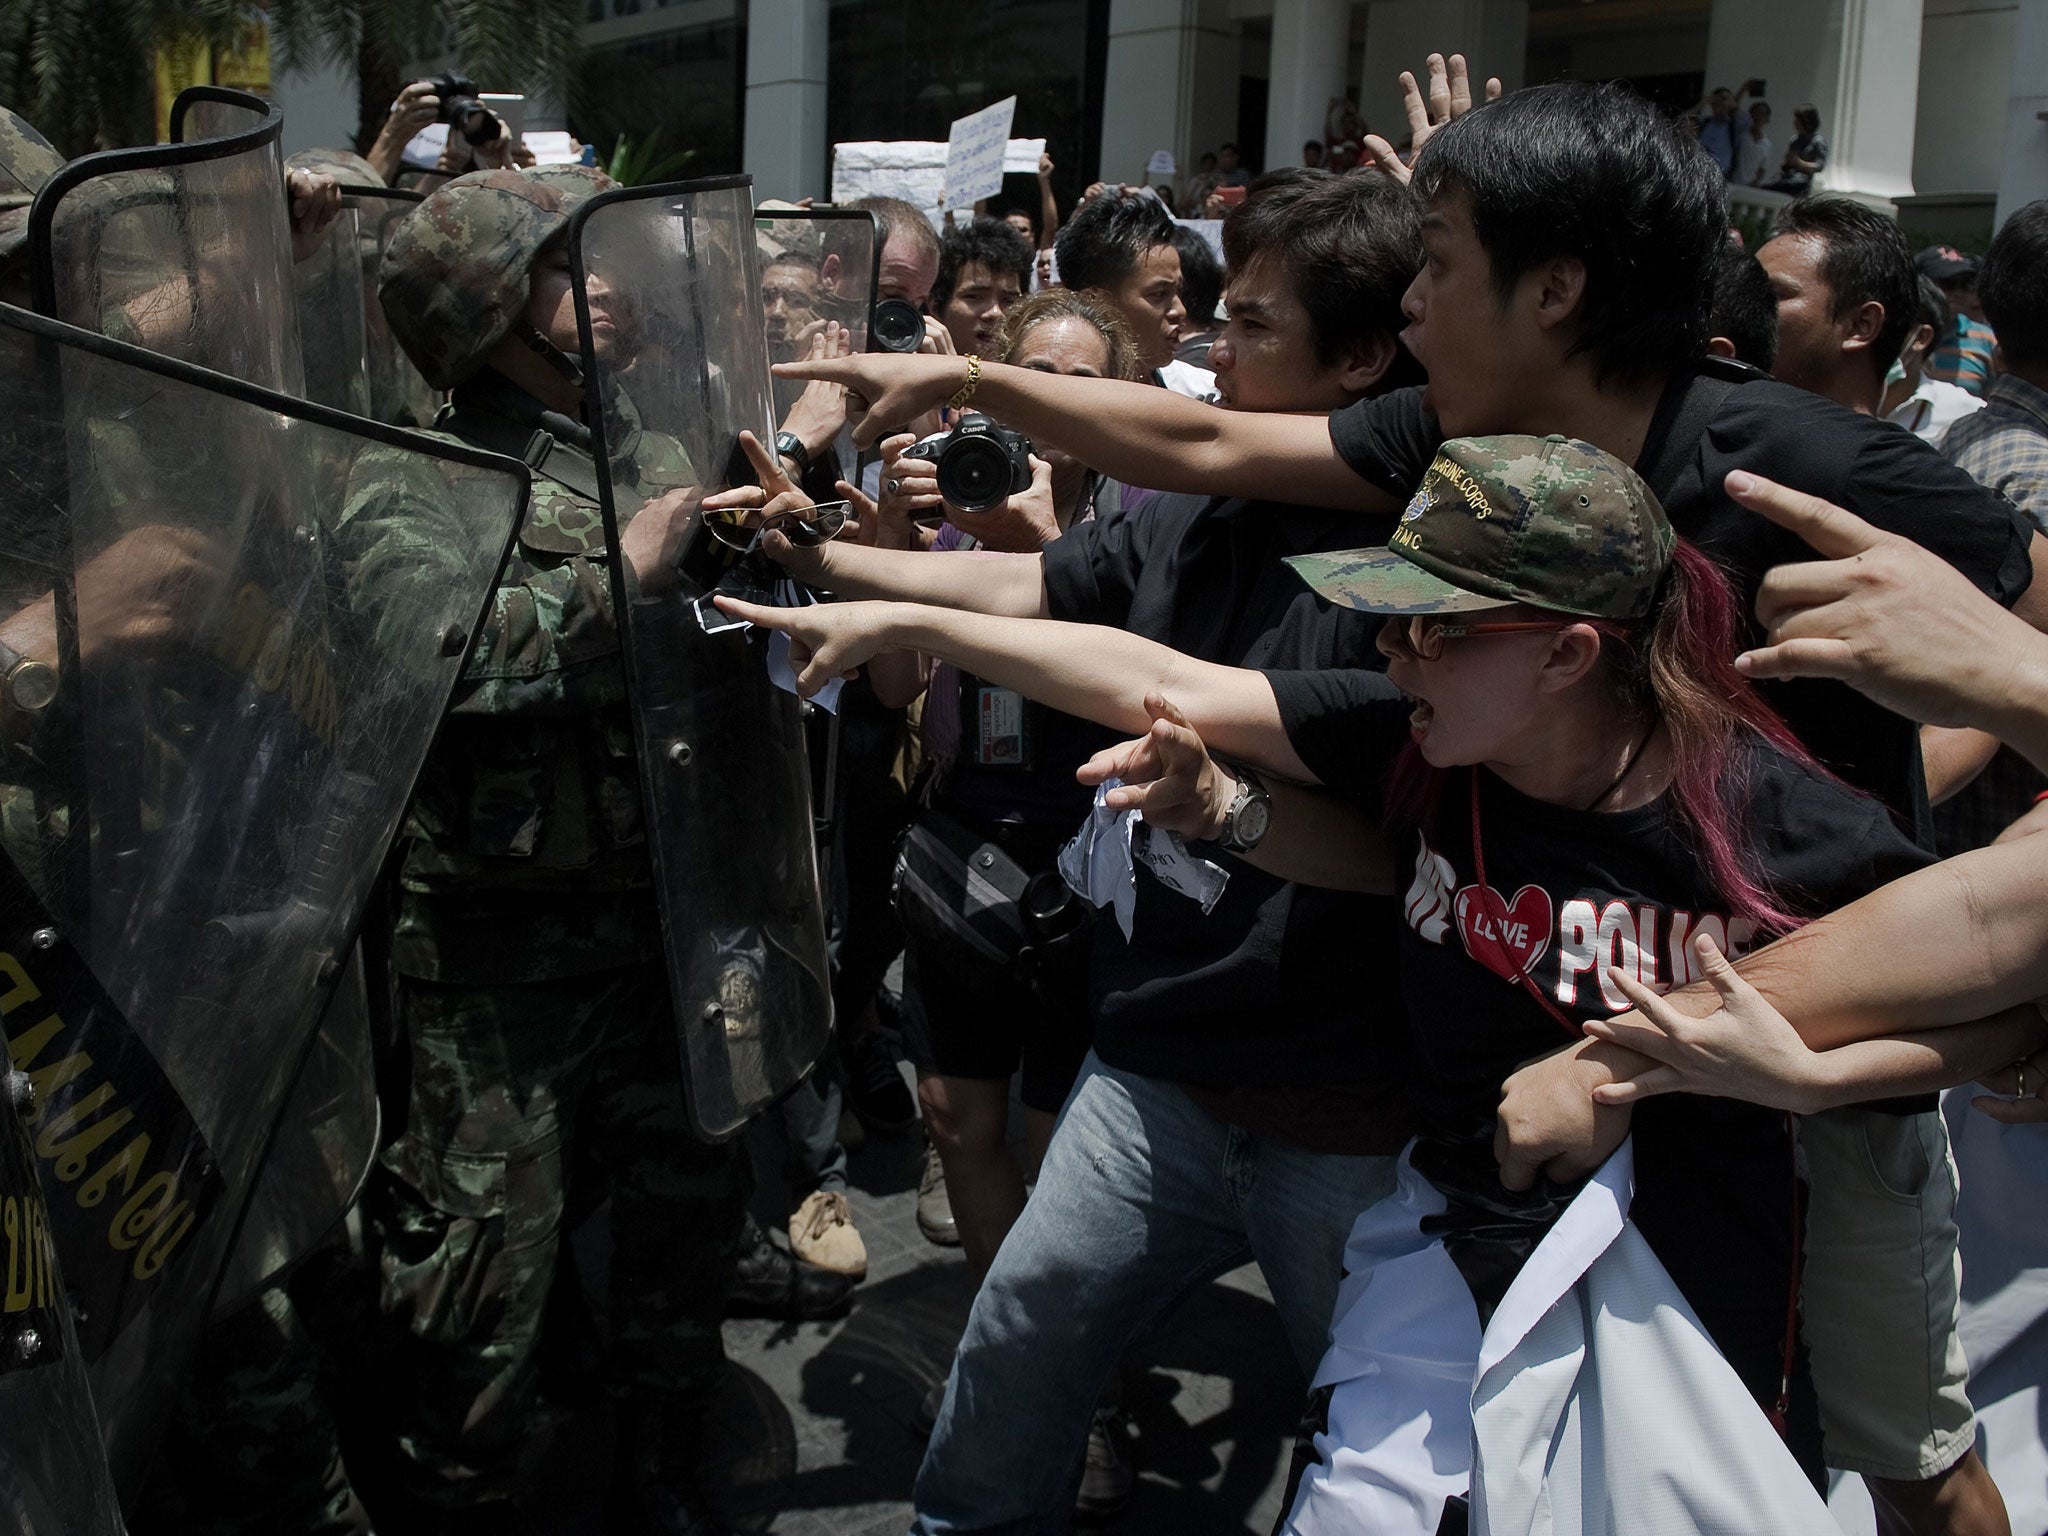 Soldiers scuffle with protesters at a rally in Bangkok